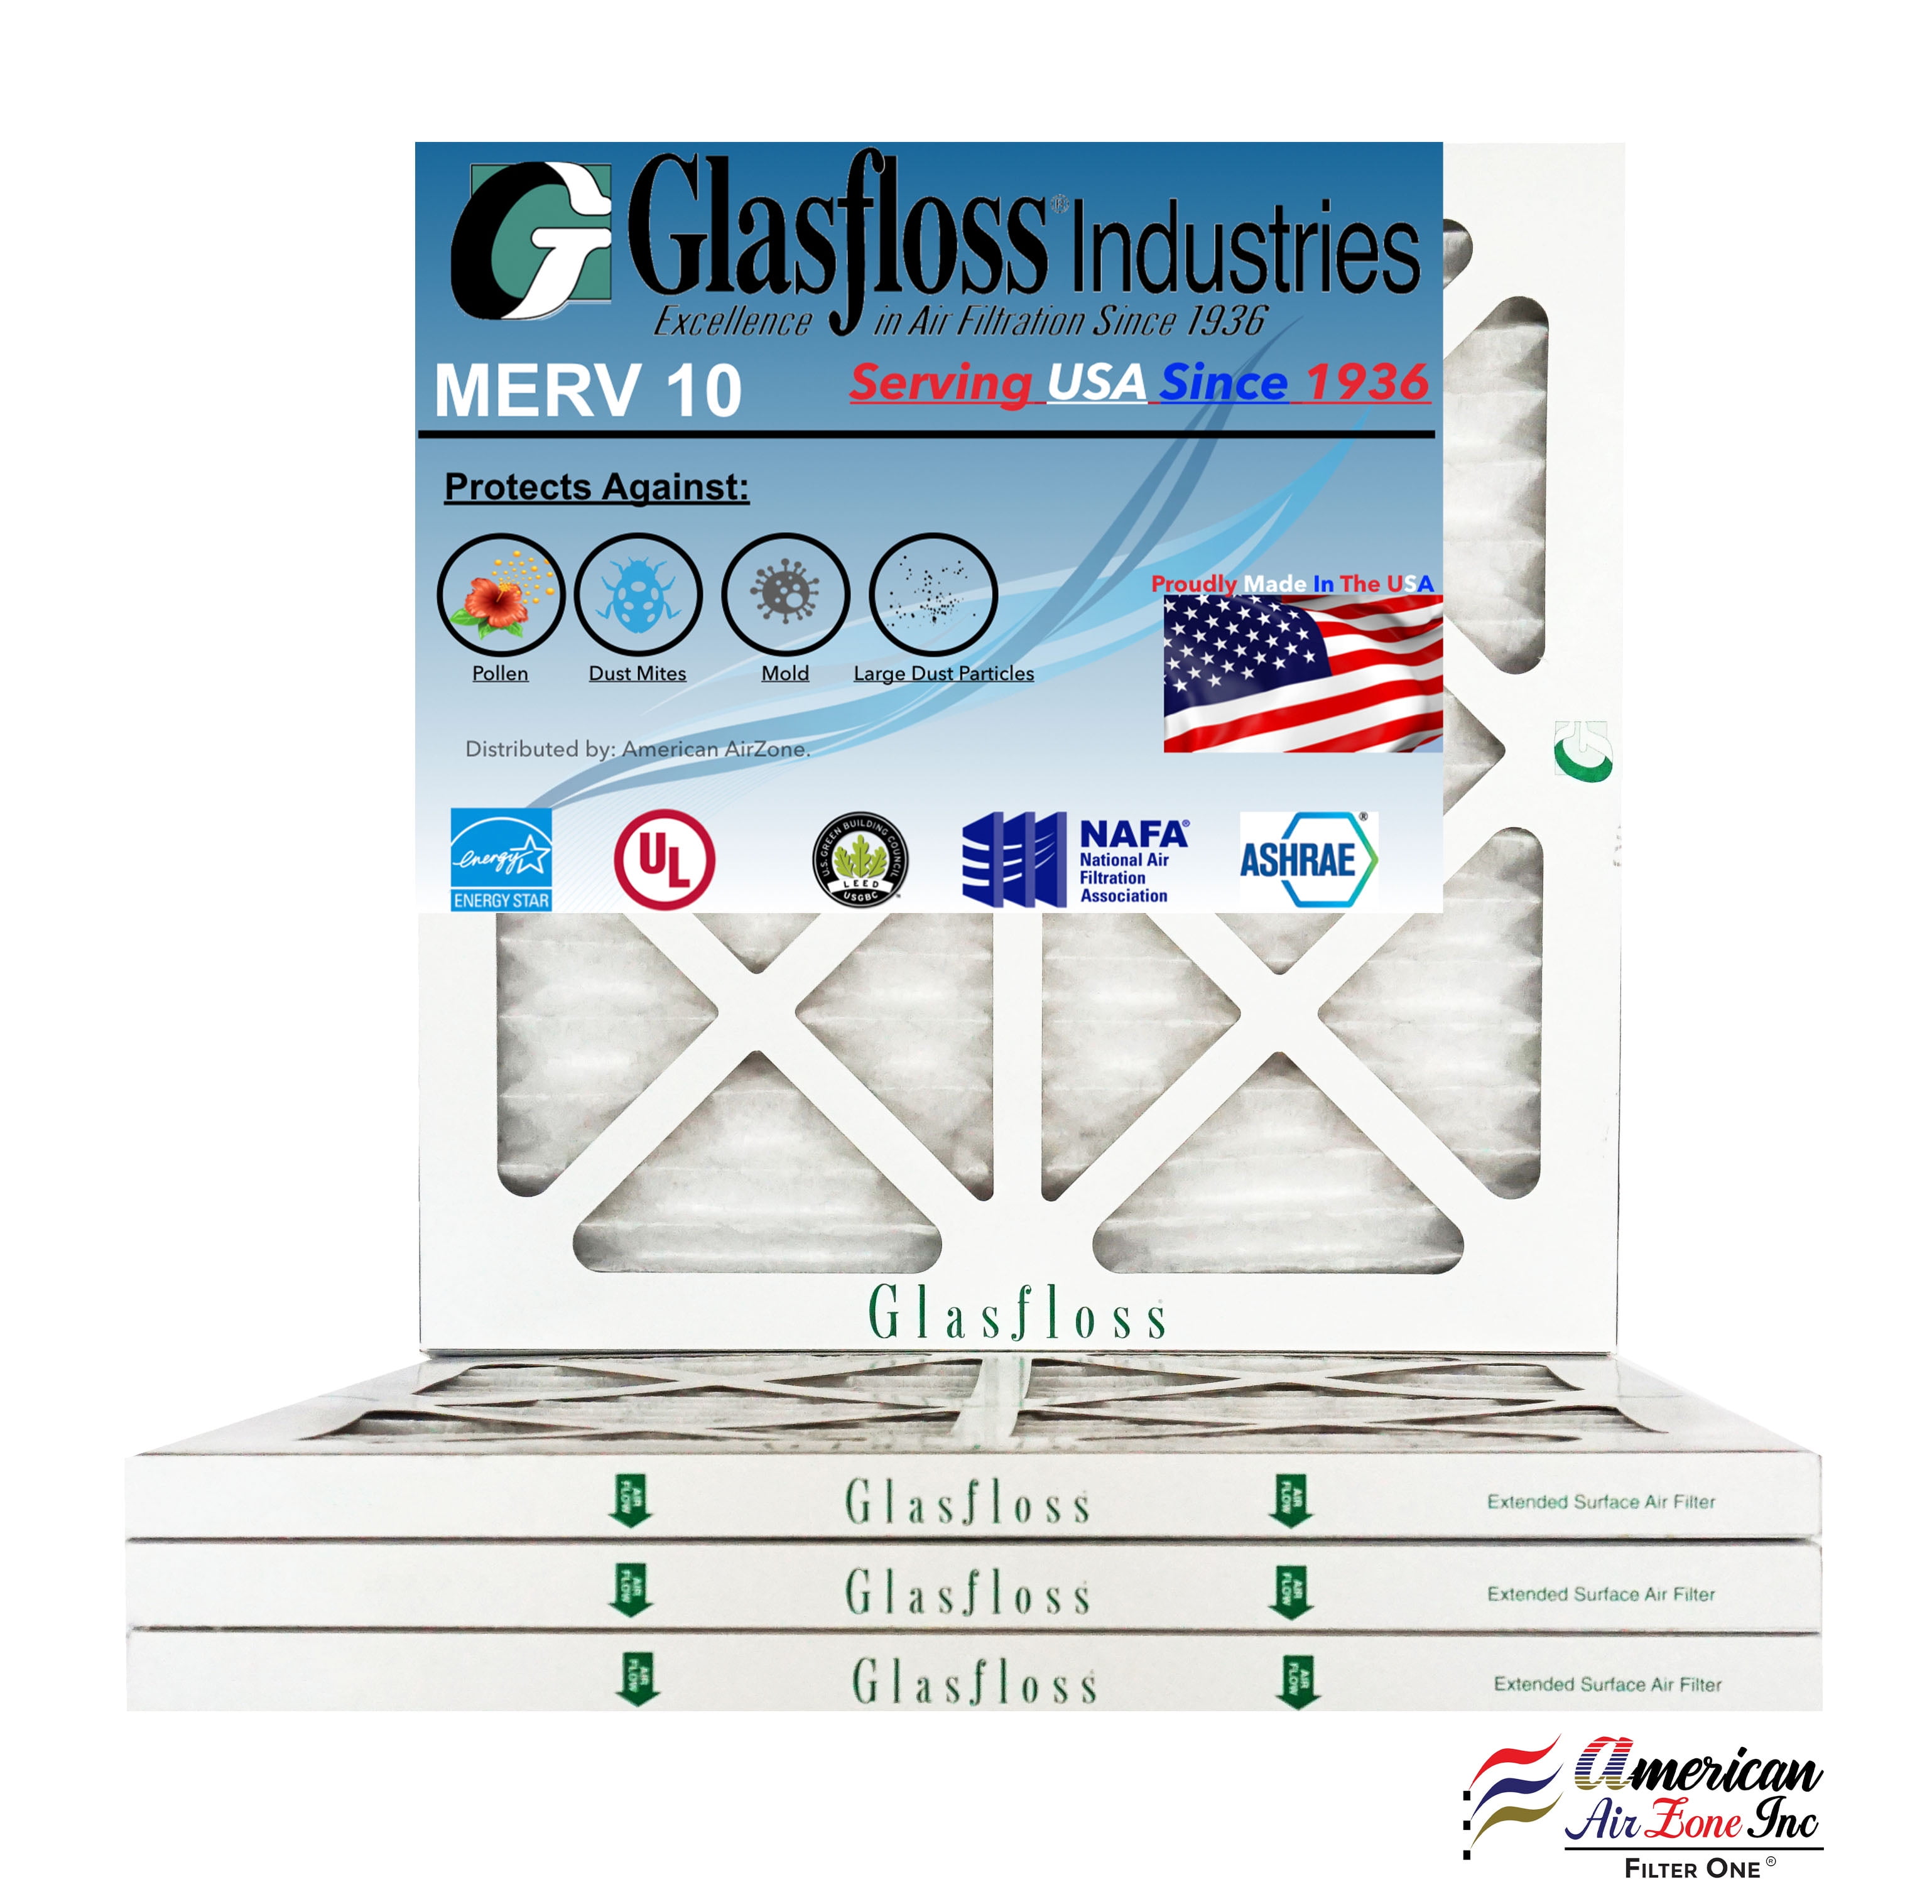 For Home or Office Pack of 12 Furnace Air Filter Made In The USA Glasfloss 16x21x1-1 Inch MERV 10 - Actual Size: 15.5 x 20.5x7/8 Inch - AC or HVAC Pleated Air Filter